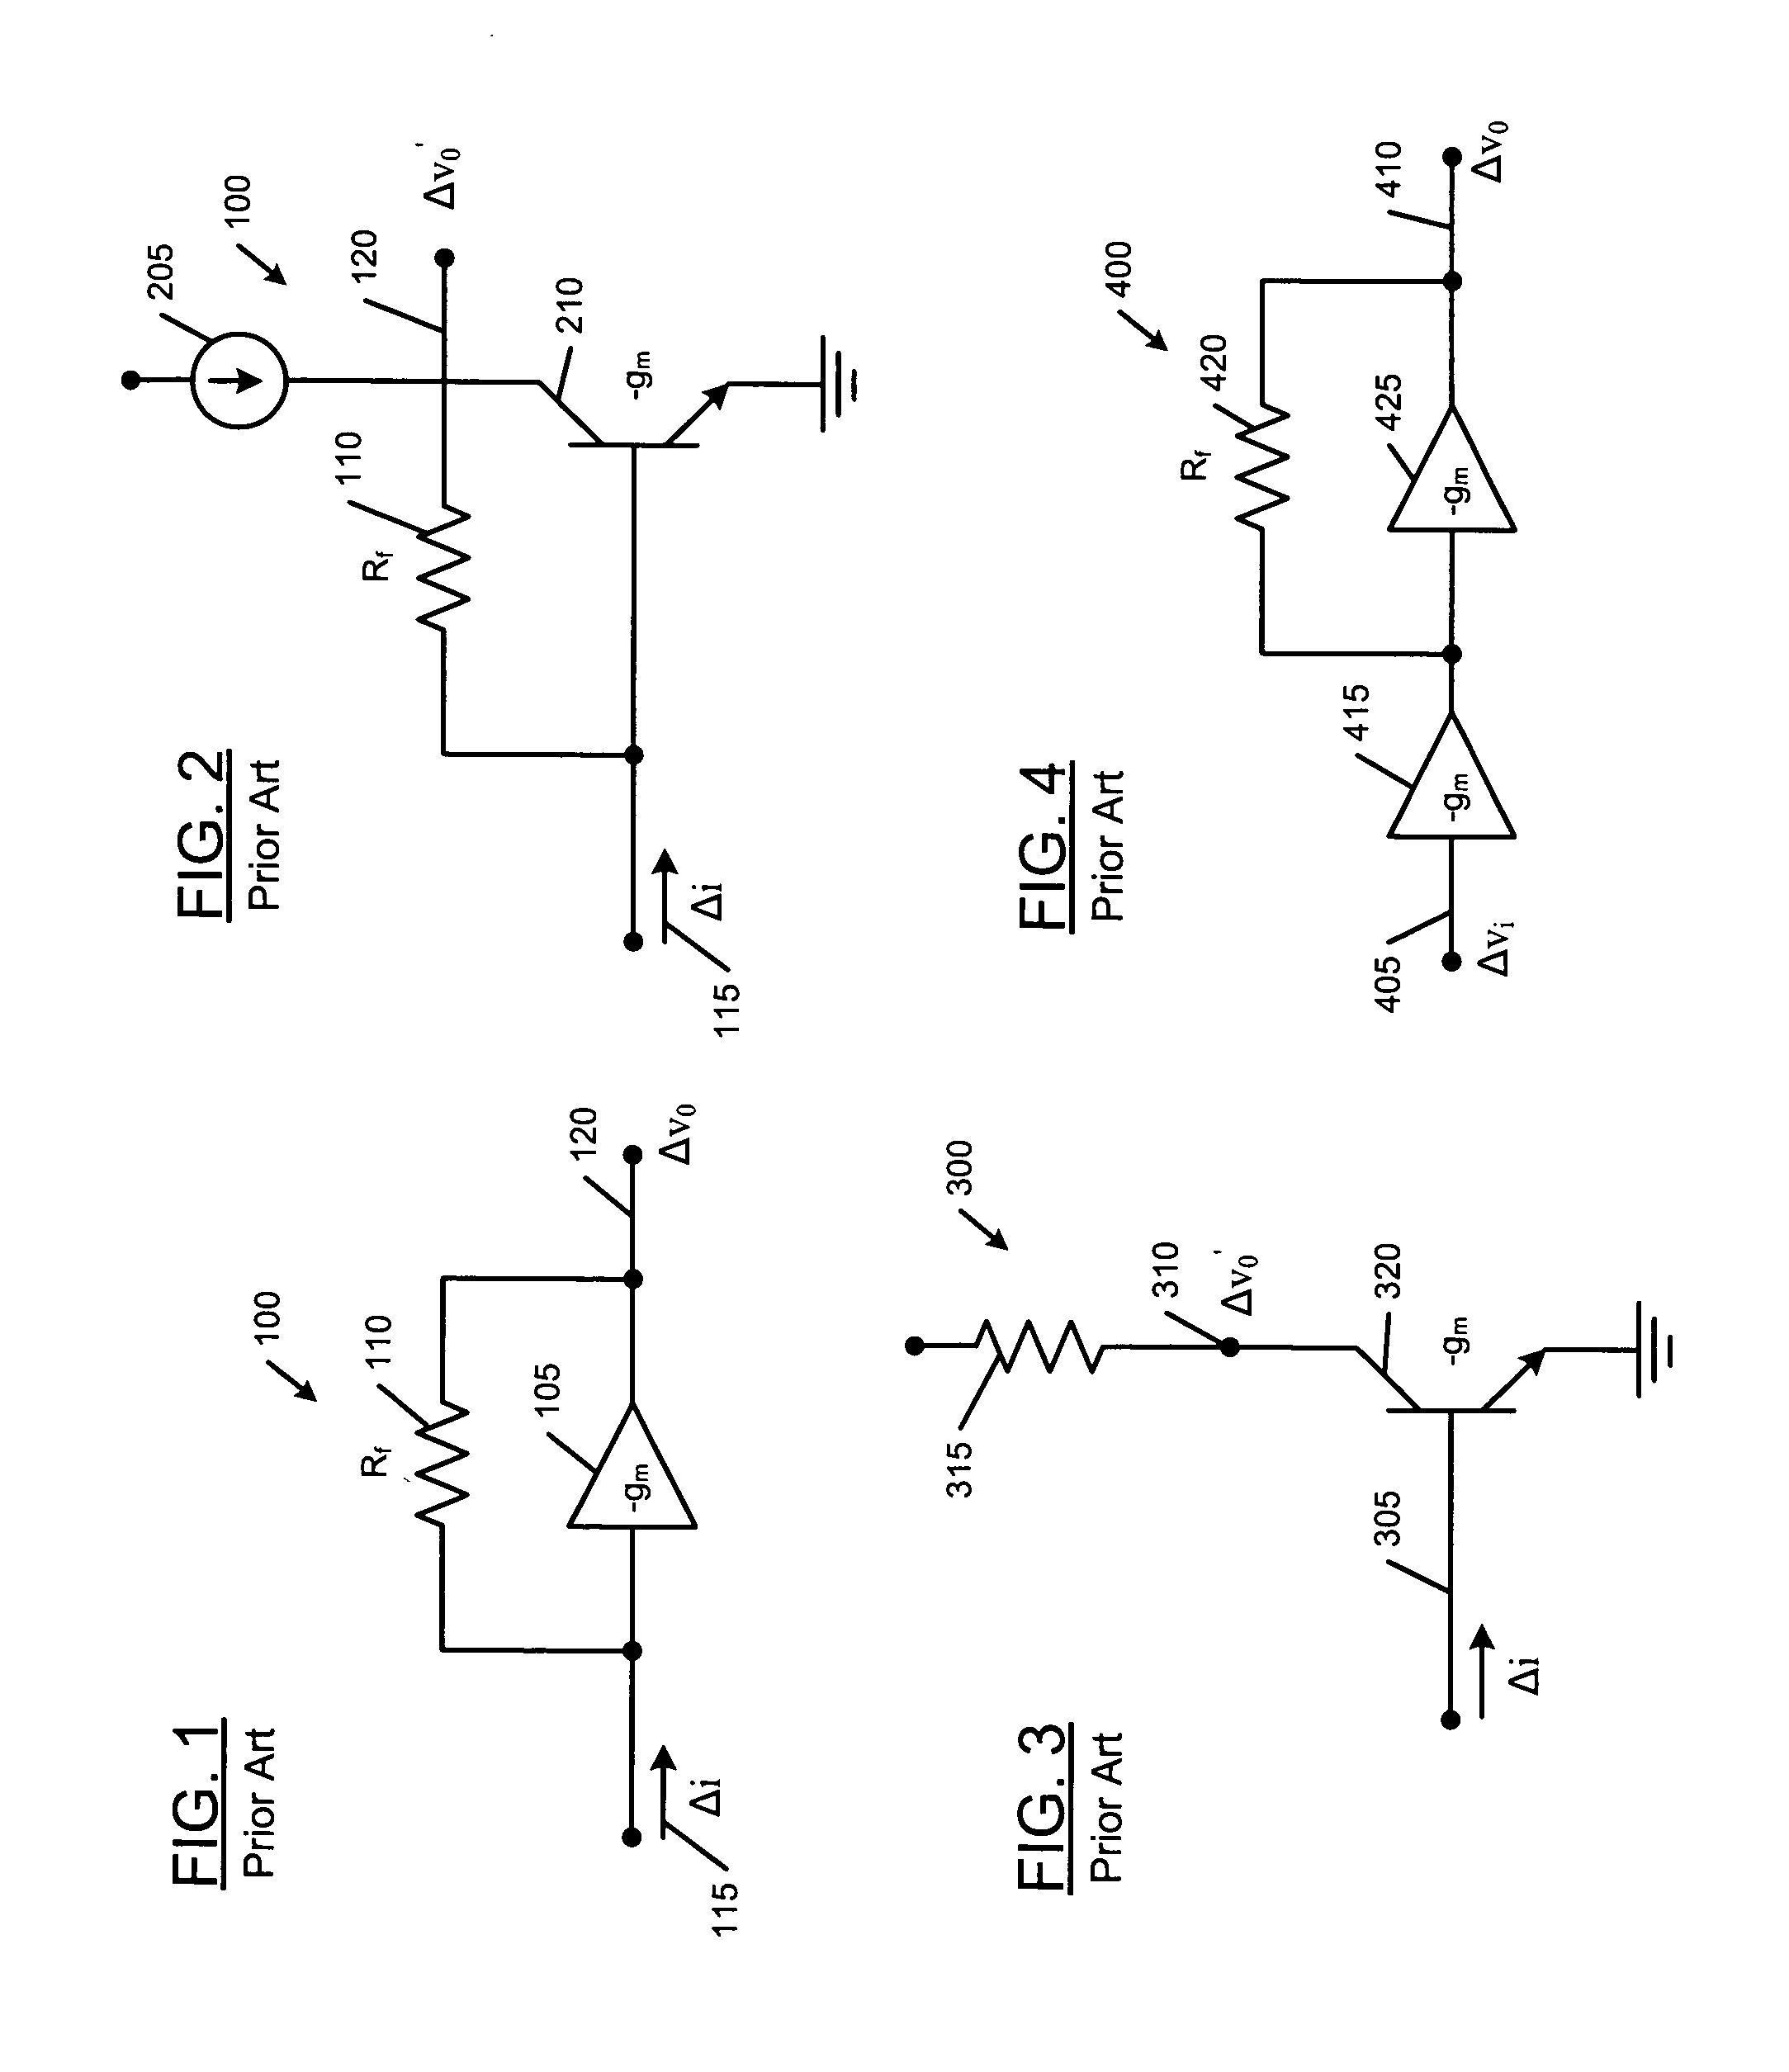 Nested transimpedance amplifier with capacitive cancellation of input parasitic capacitance